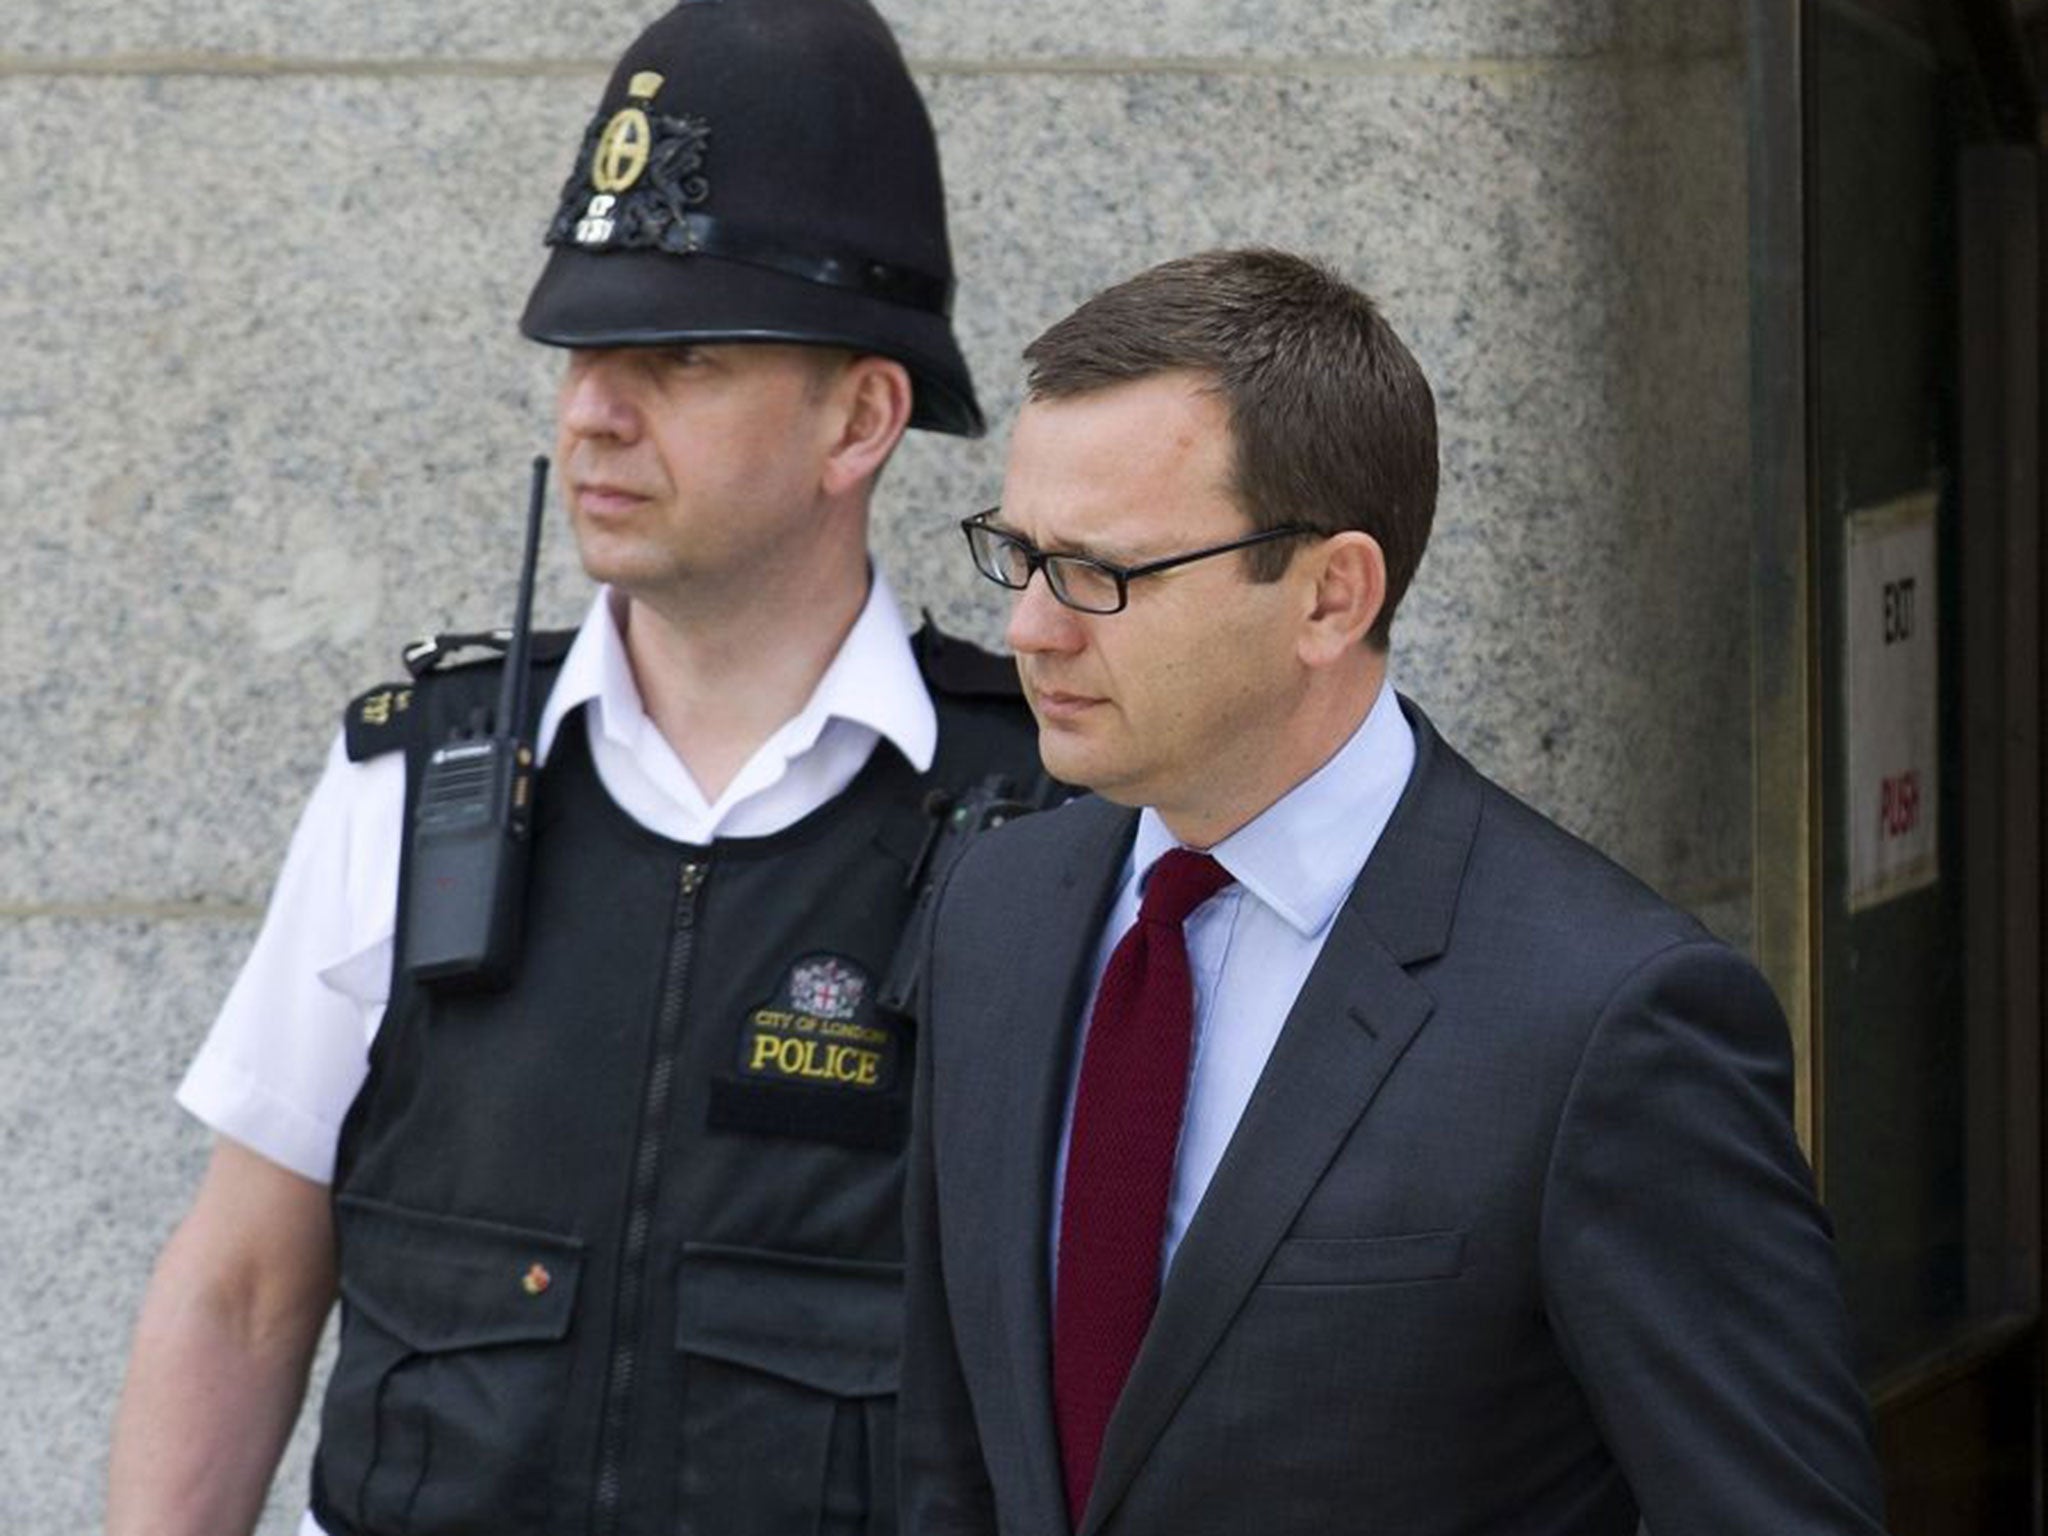 Former News of the World editor Andy Coulson leaves the Old Bailey in central London, on June 25, 2014.